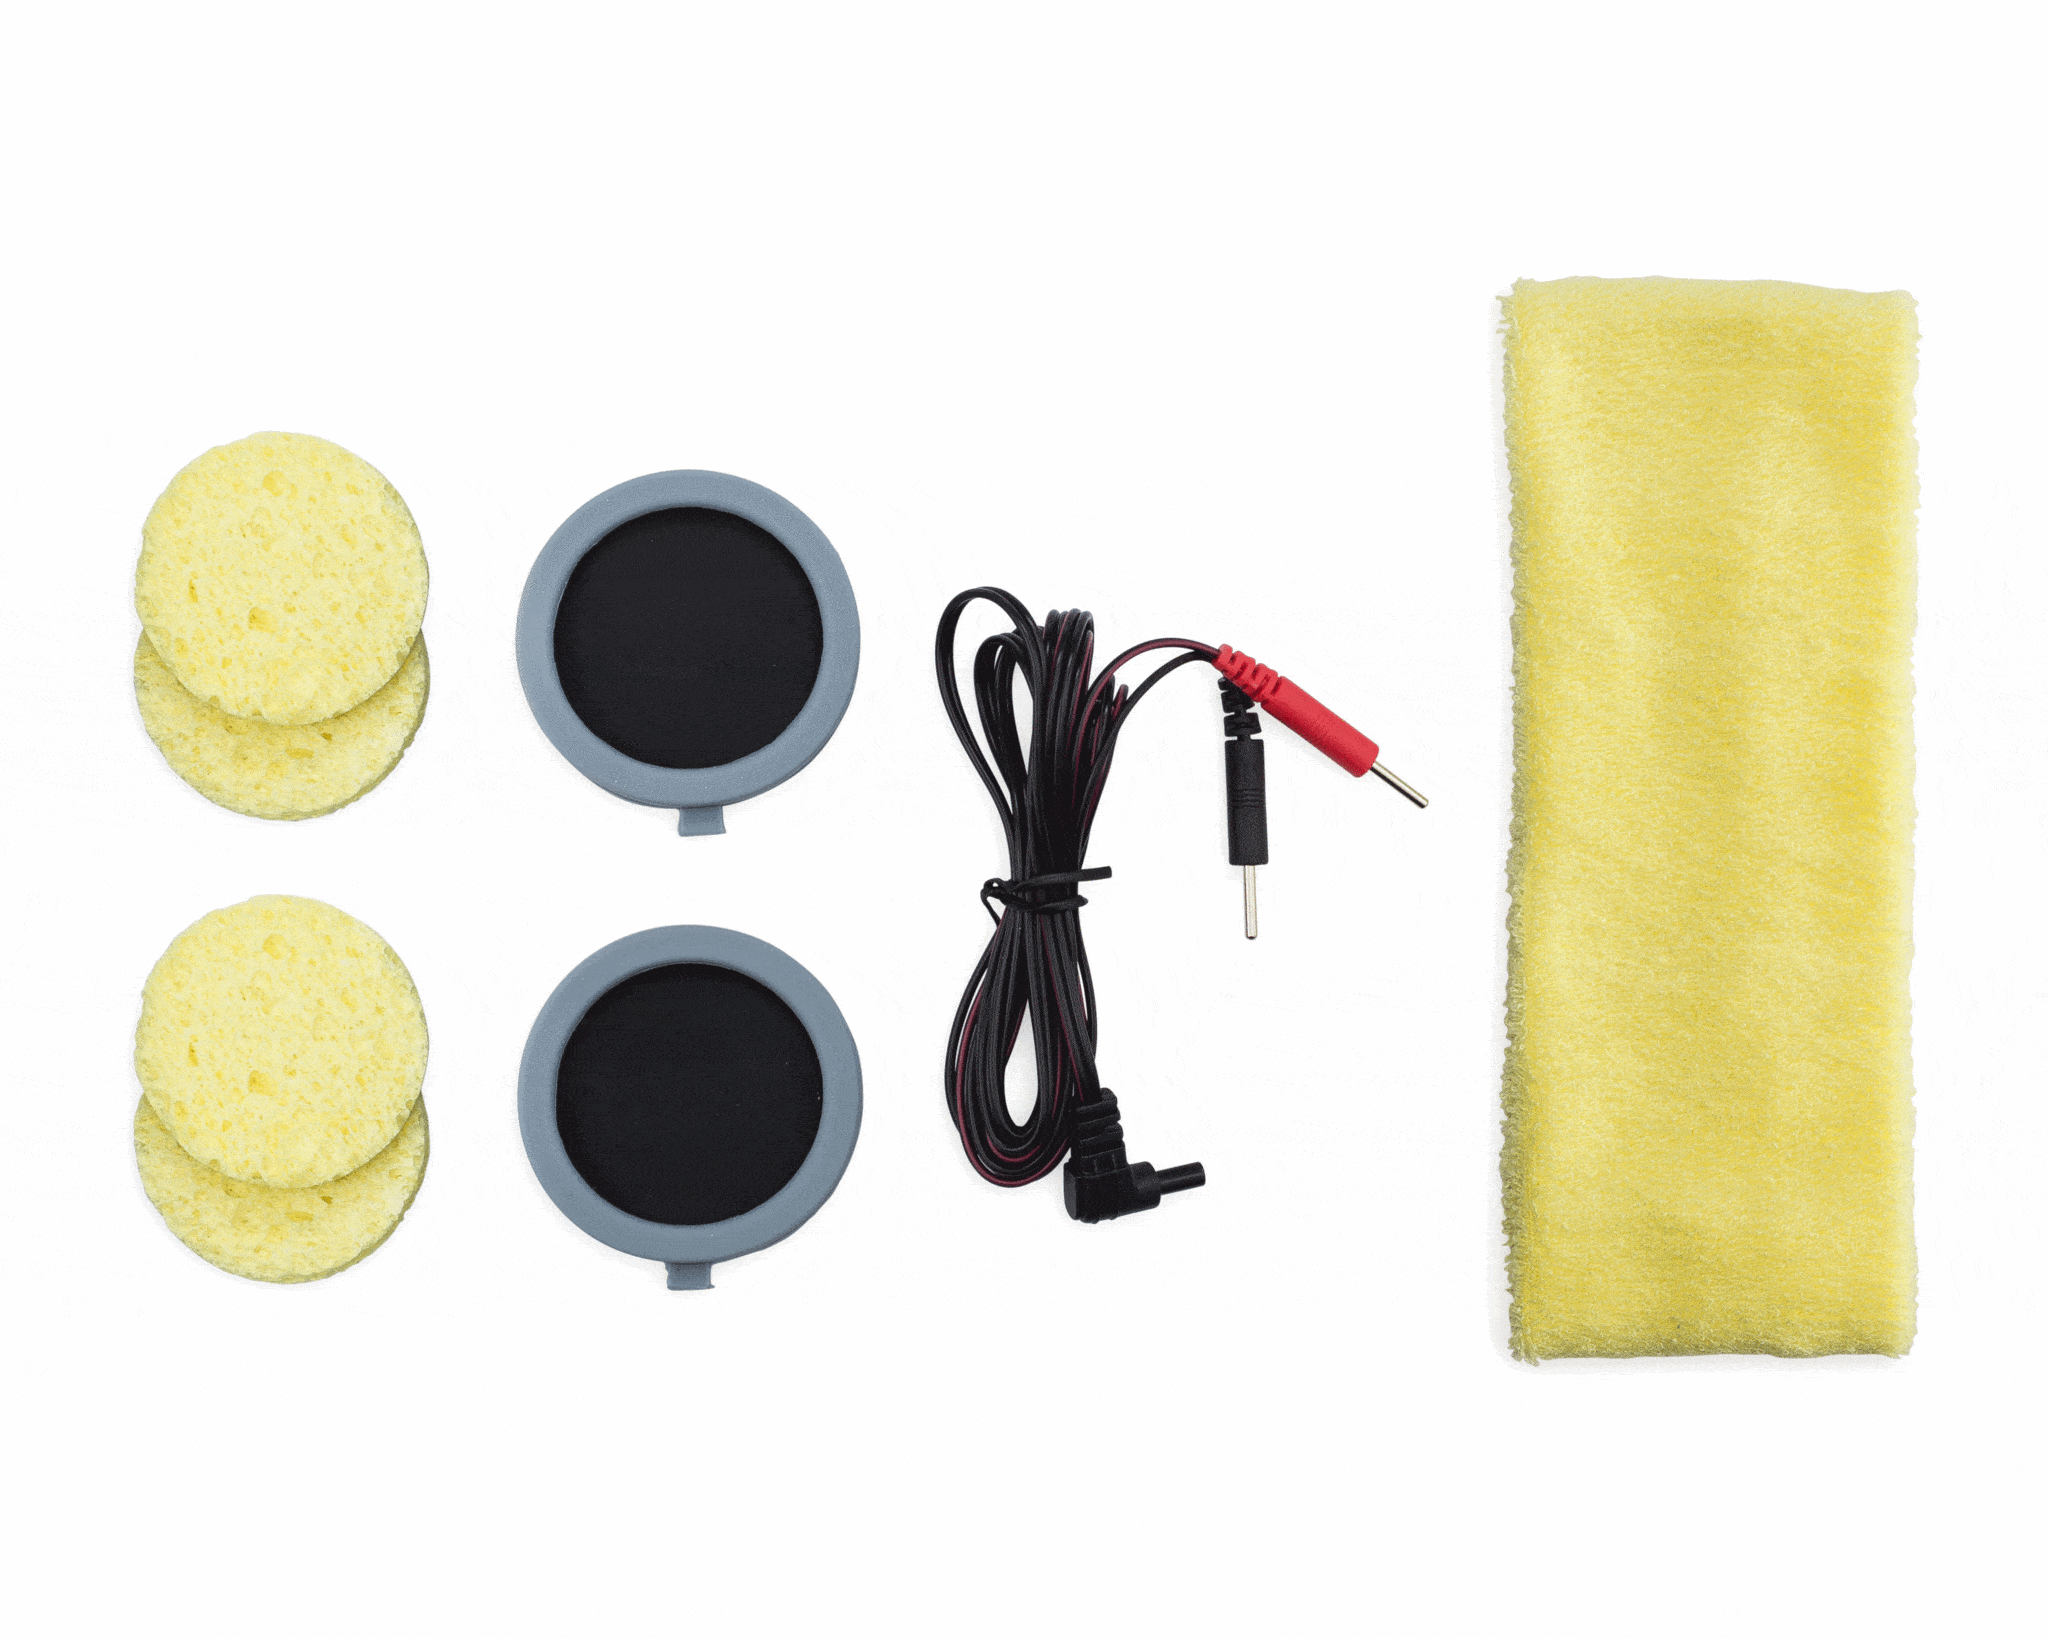 Accessory Kit with Sponges, Wires, Electrodes, Headband for